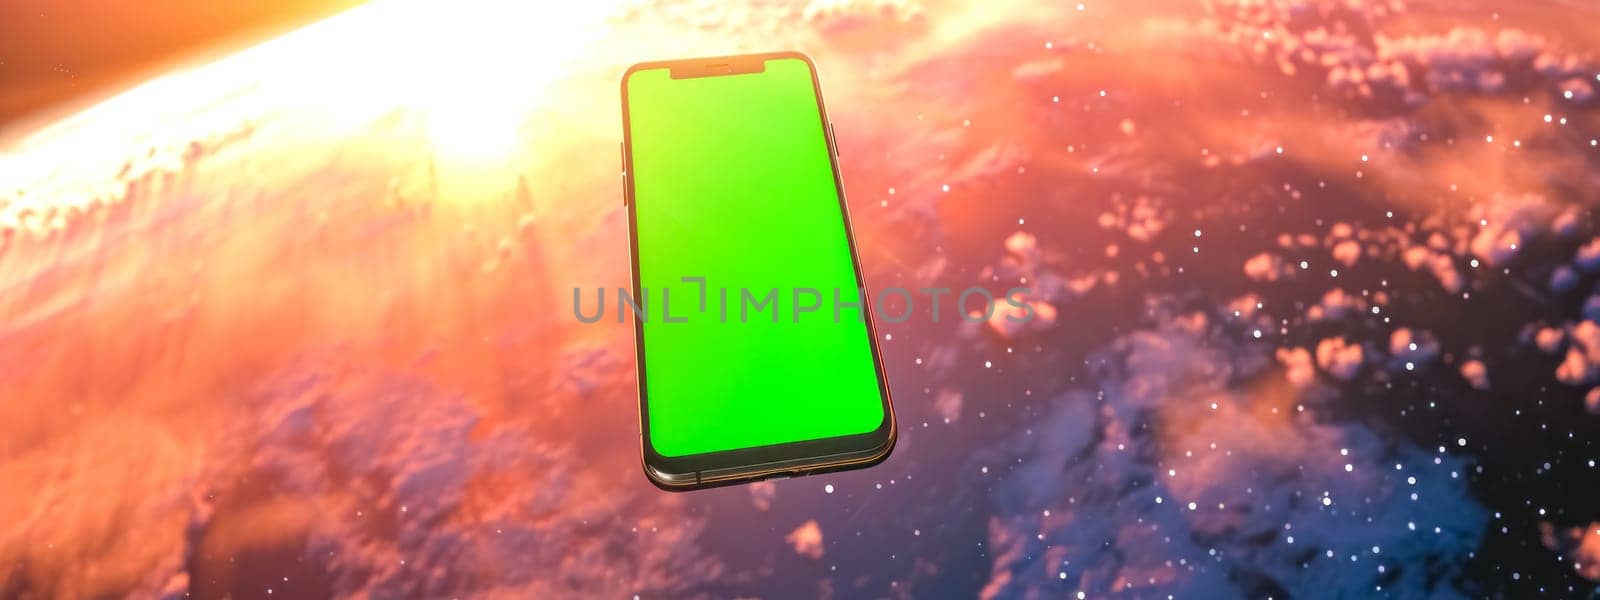 smartphone with a green screen floating in the foreground with a dramatic backdrop of the Earth's atmosphere from space, where the sun casts a warm glow on the planet. banner